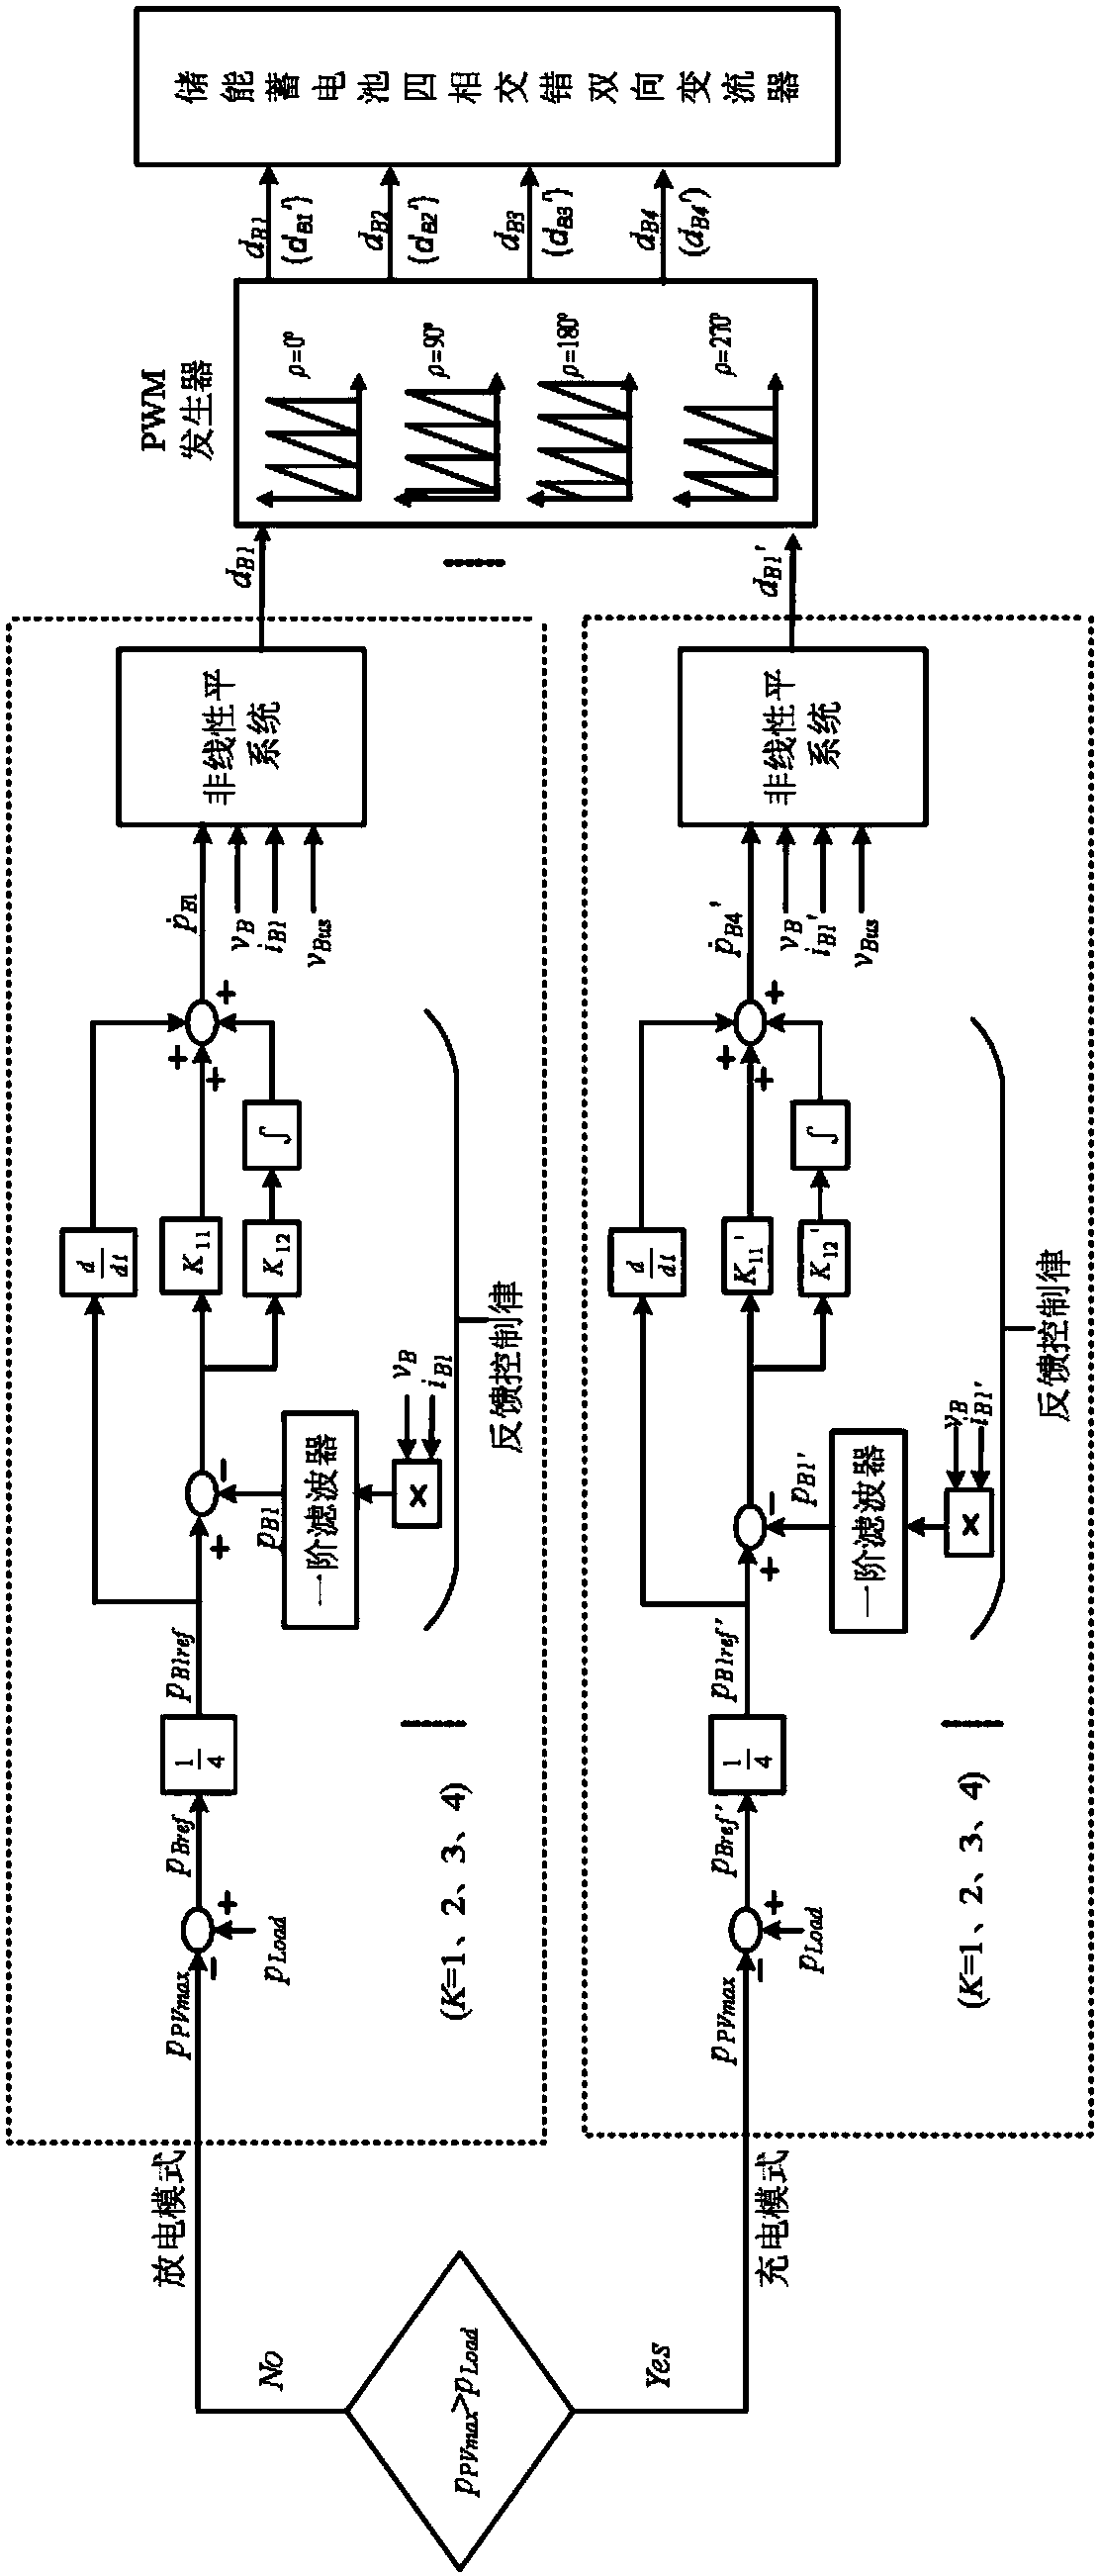 Power smoothing control method for distributed optical-storage DC power supply system